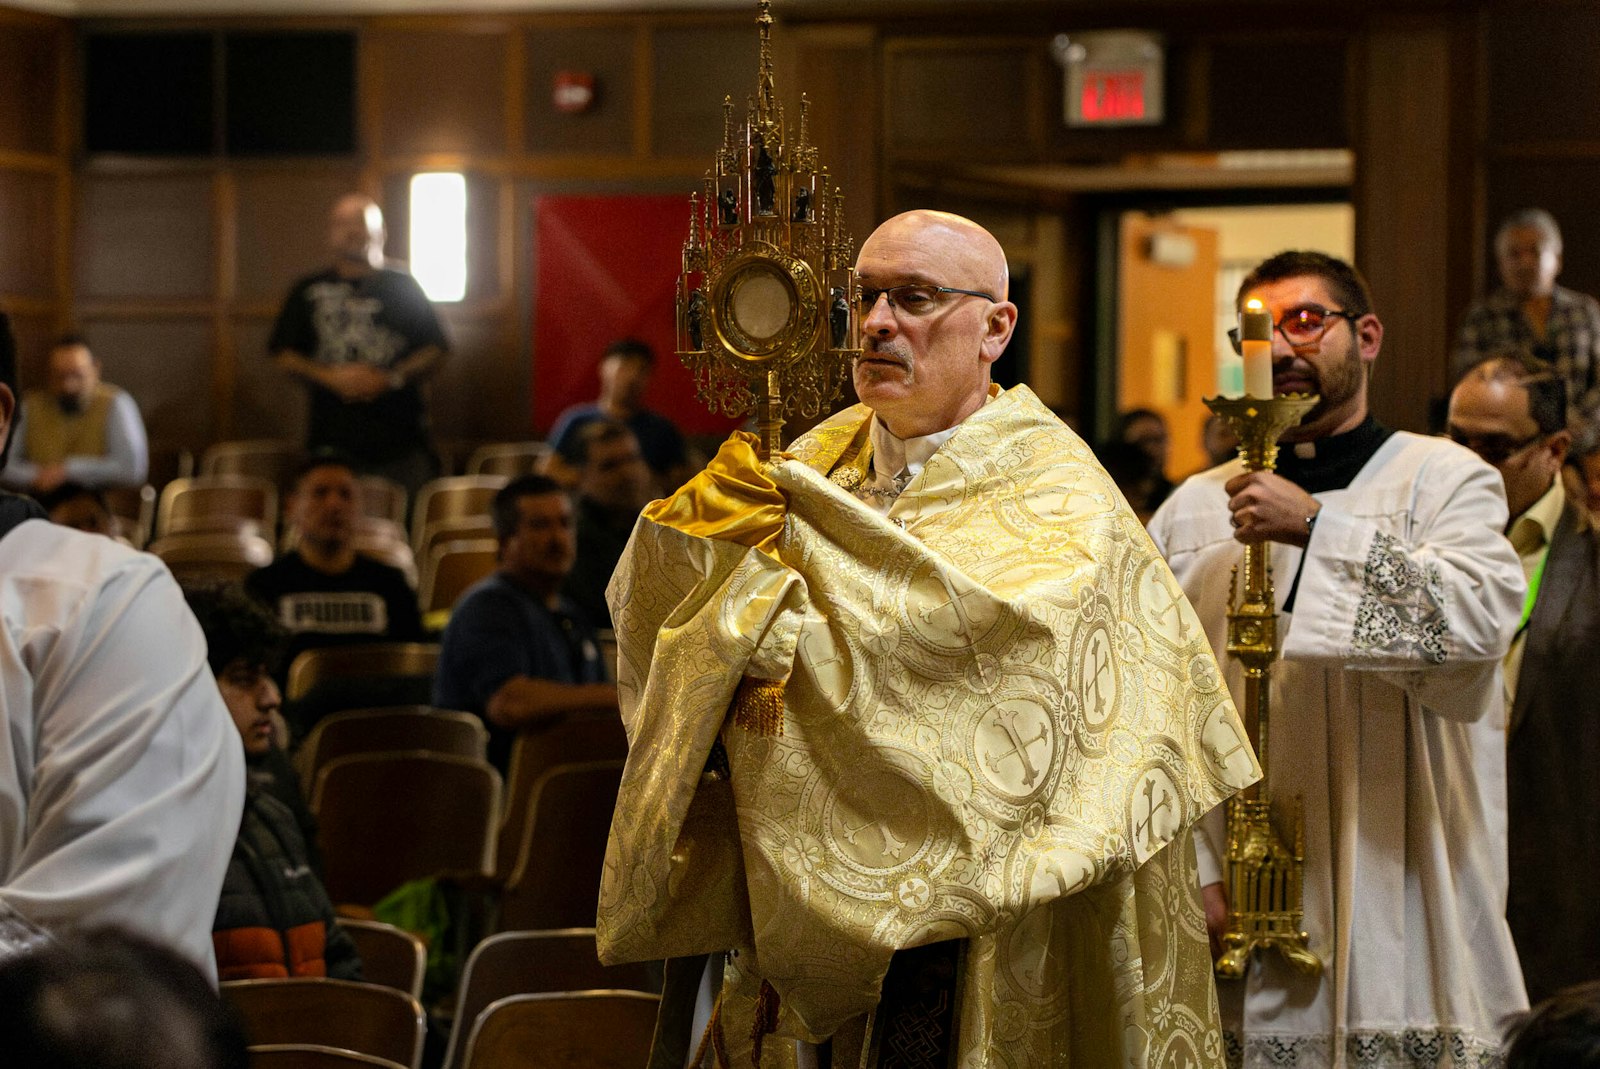 A holy hour included a Eucharistic procession through the school's corridors.